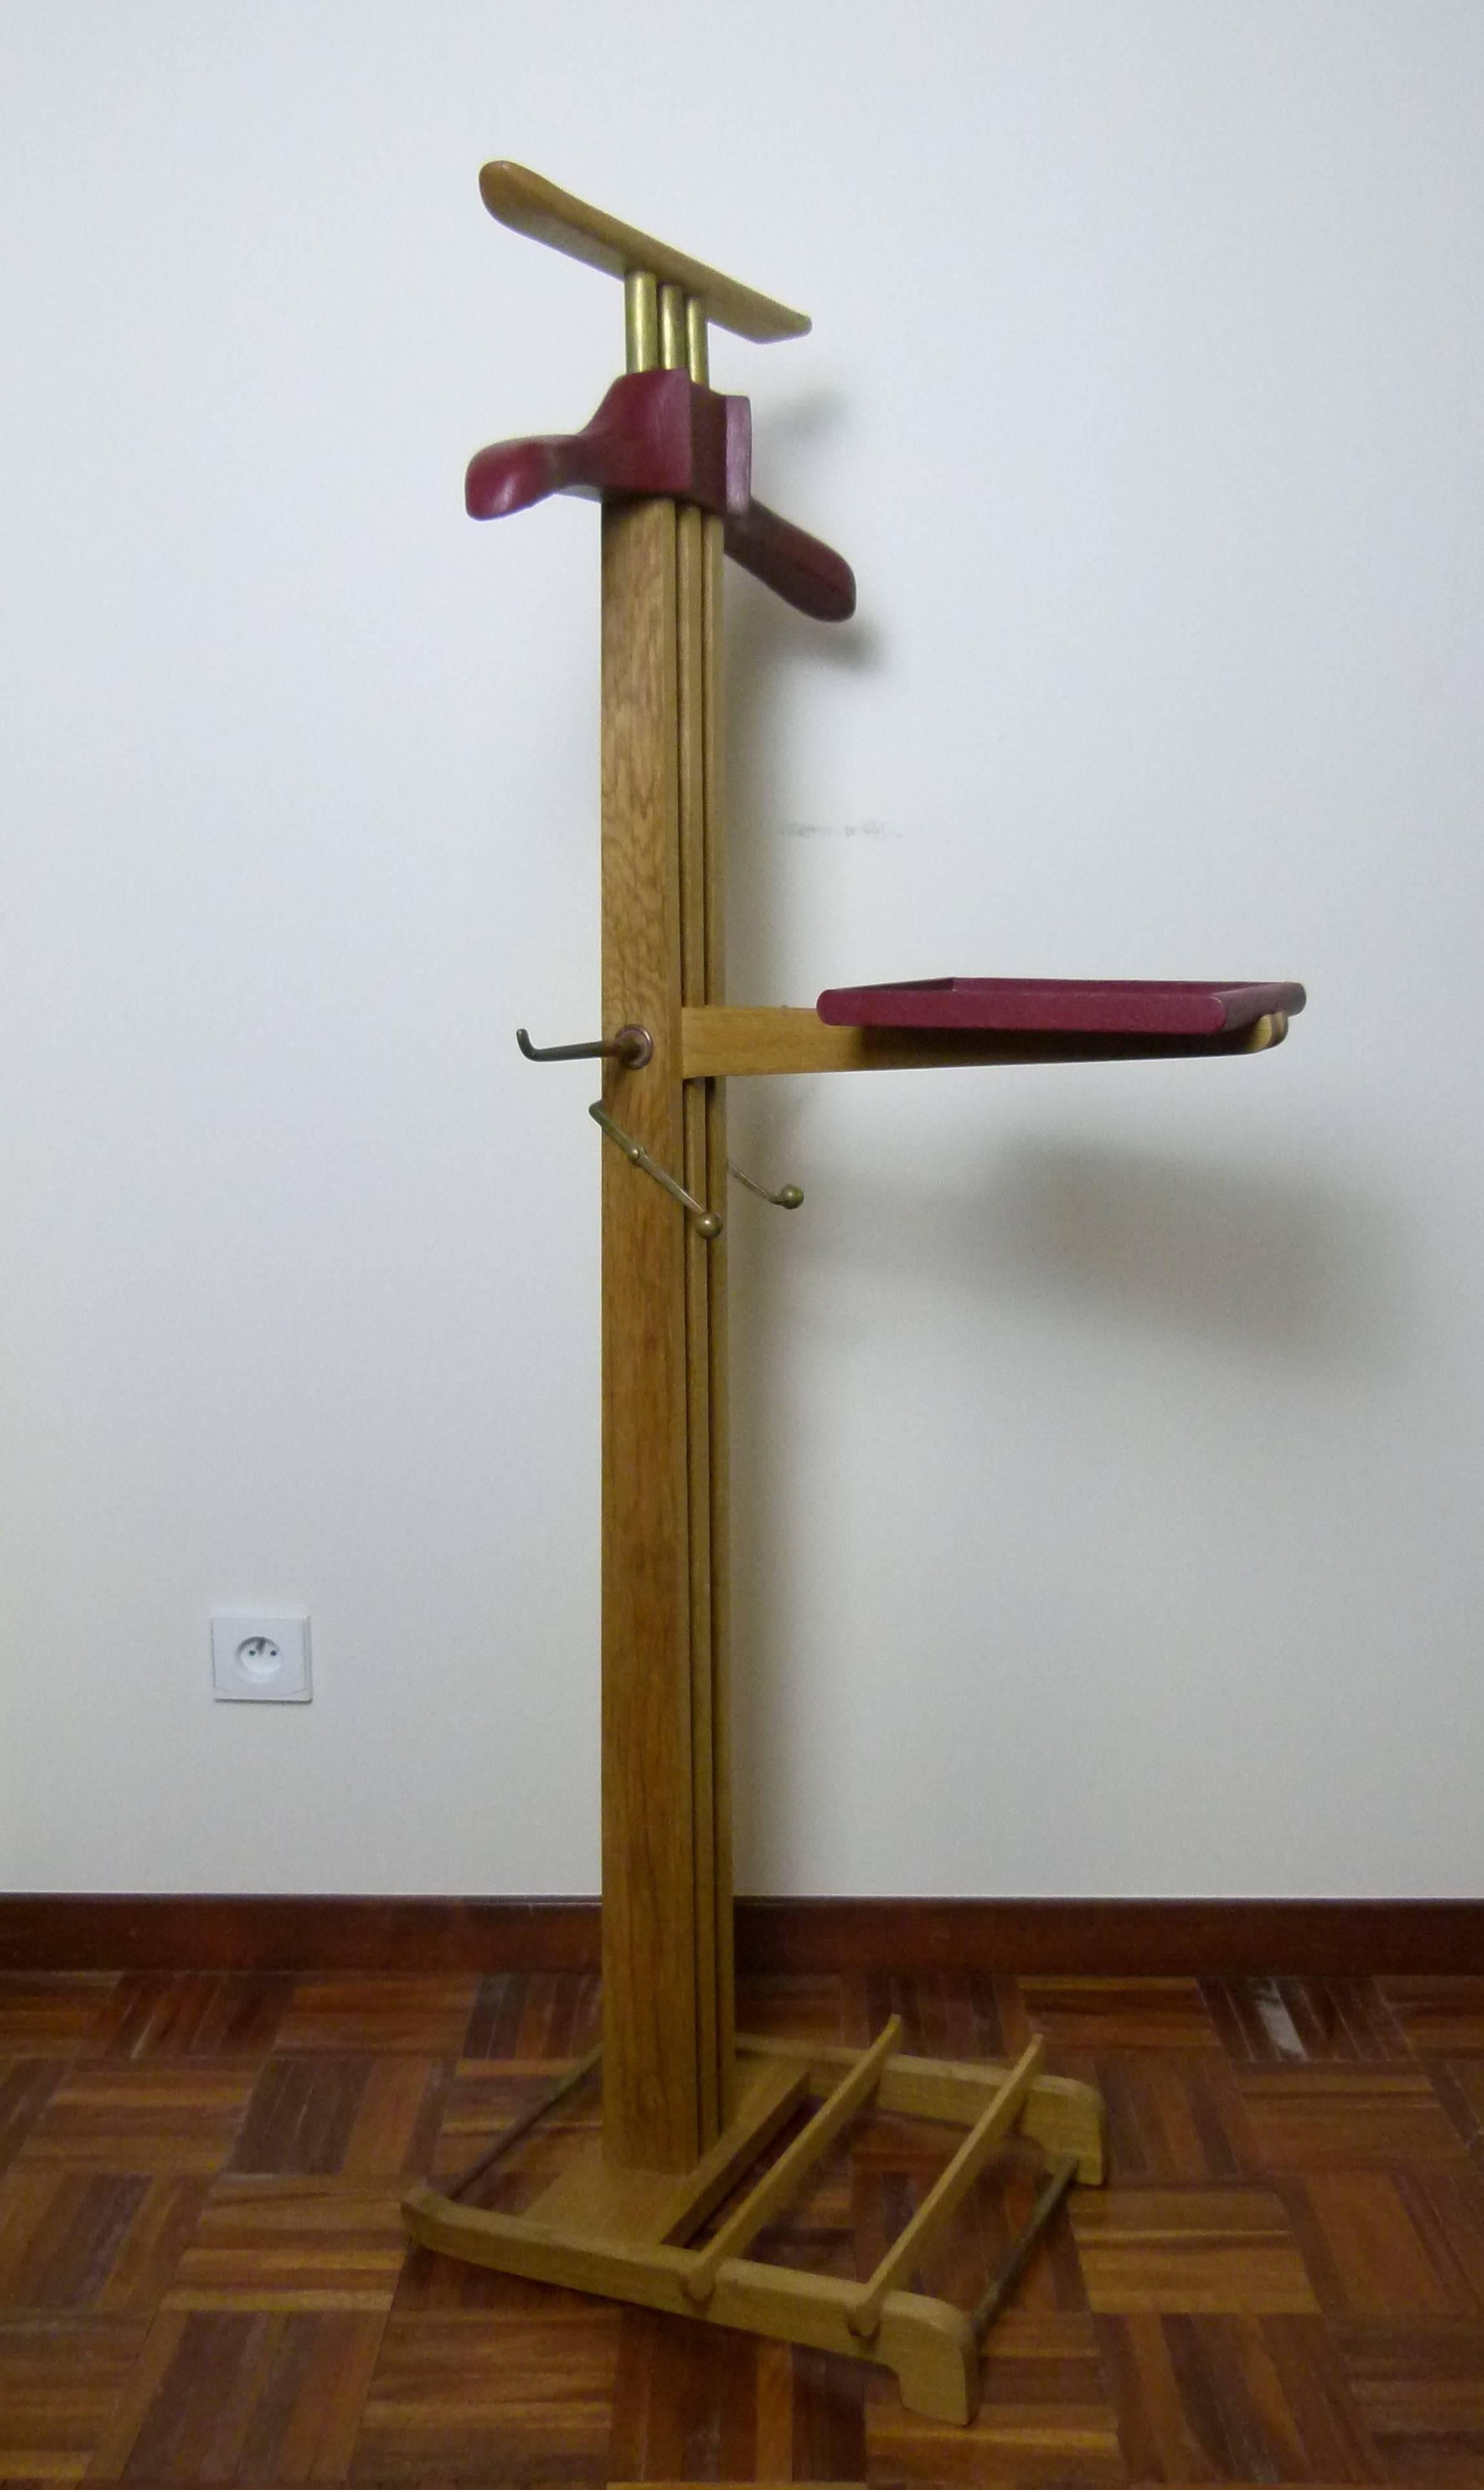 Solid oak and red leather-wrapped cloth valet, with a coat hanger and a folding table wrapped with red leather by Hermès.

Tie holders and shelf mechanism in gilded bronze.
1940s French work of Paul Dupré-Lafon for Hermès.
Furniture listed in